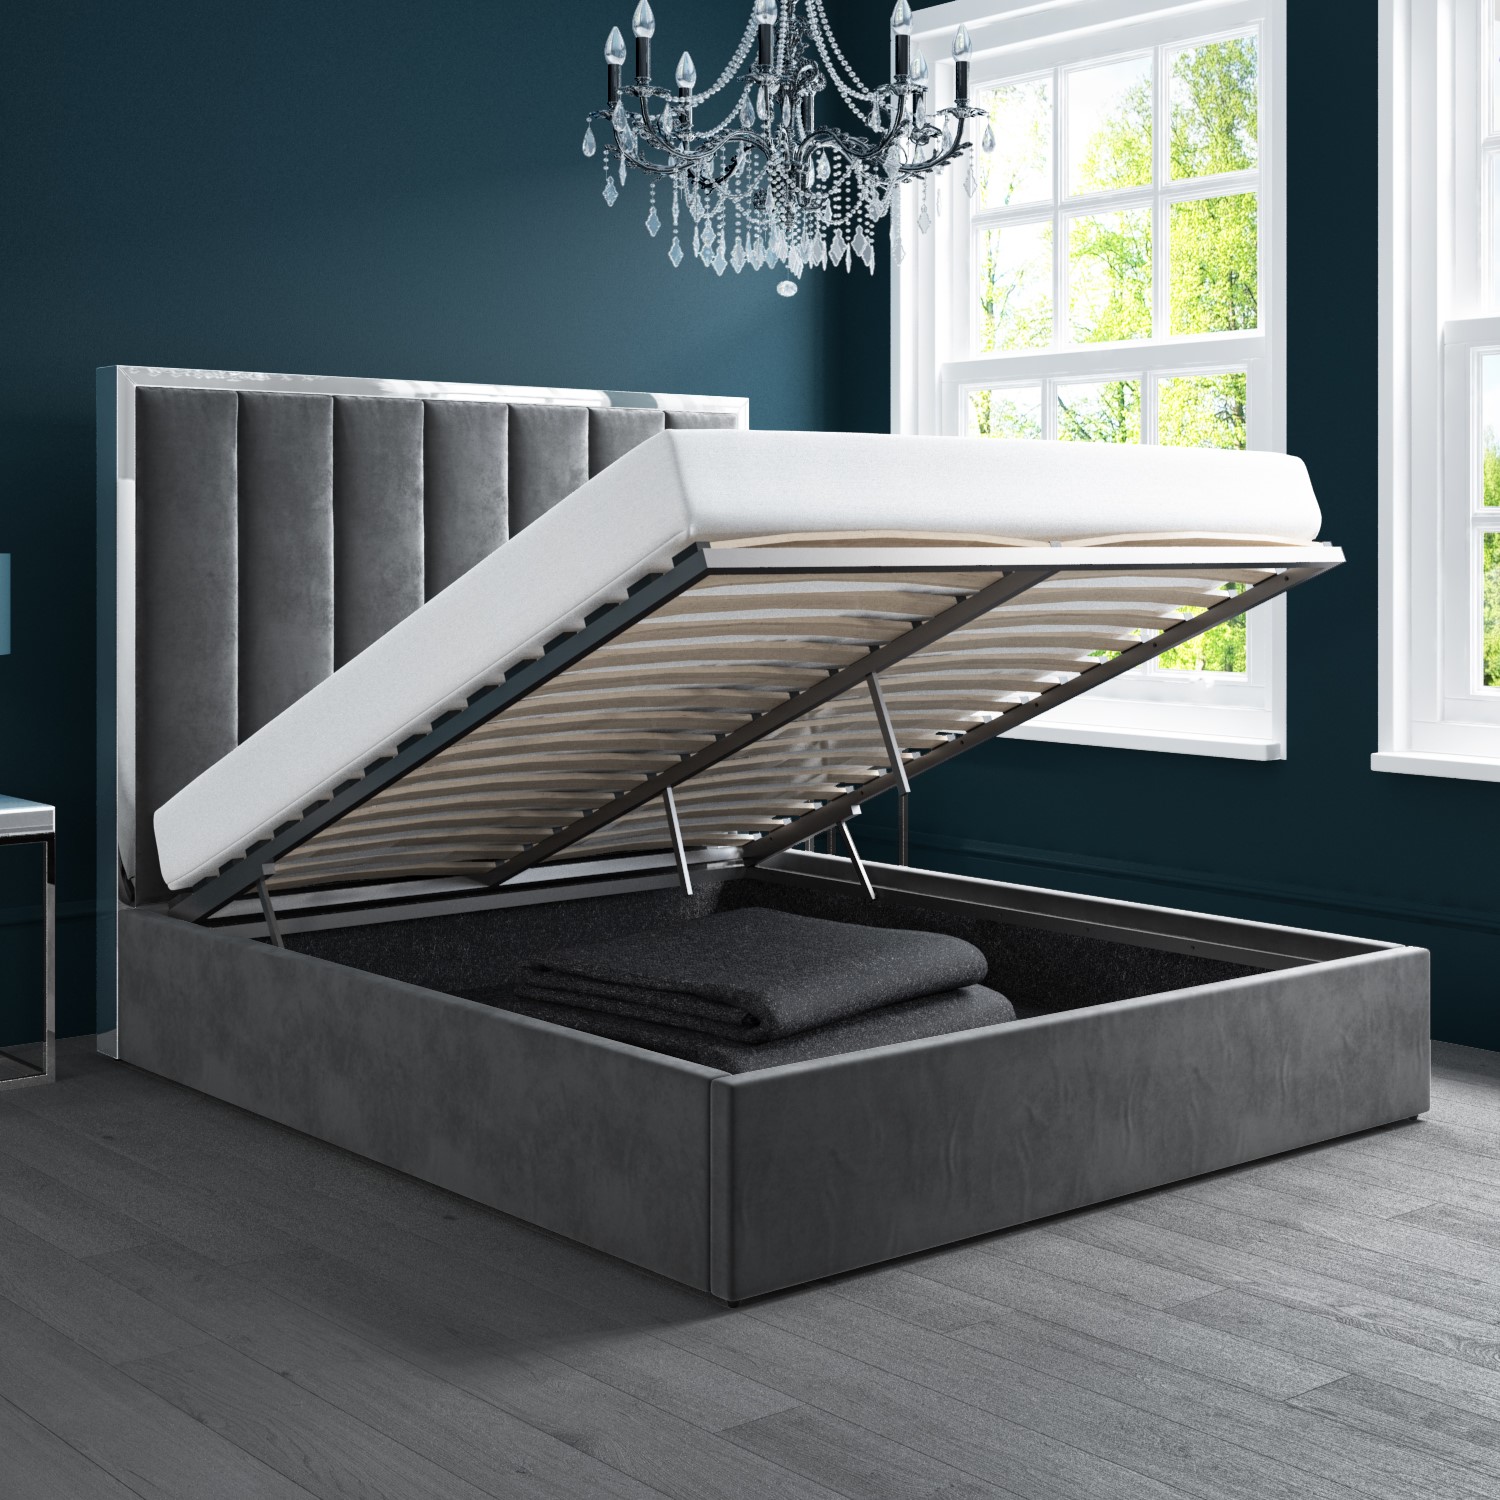 Grey Velvet Double Ottoman Bed With, Do Ottoman Beds Come Apart